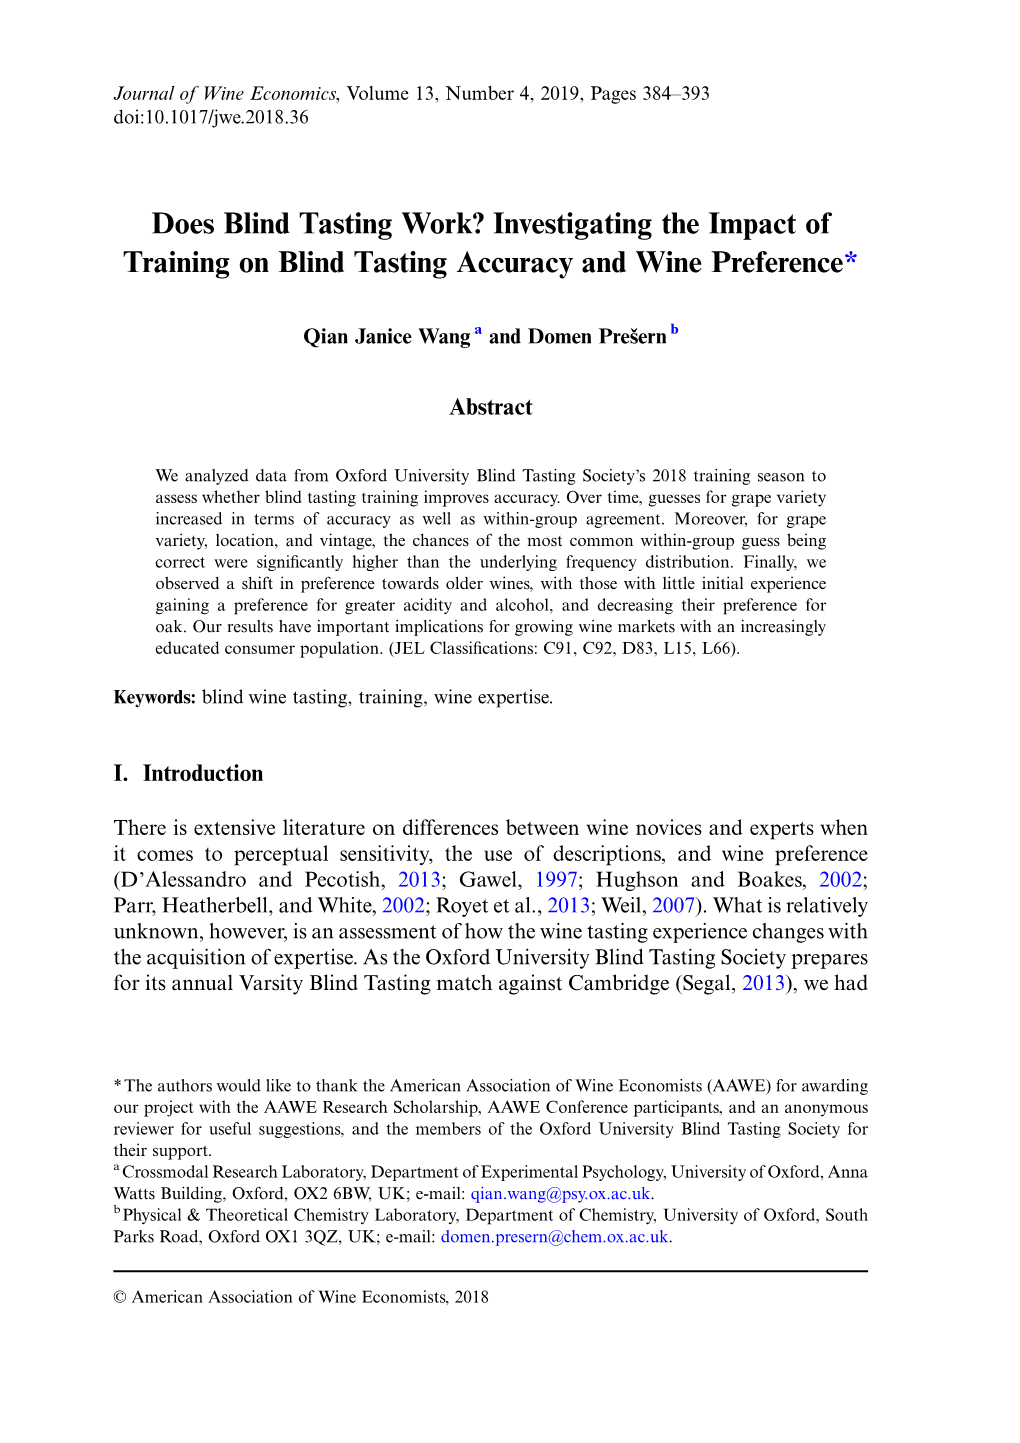 Does Blind Tasting Work? Investigating the Impact of Training on Blind Tasting Accuracy and Wine Preference*